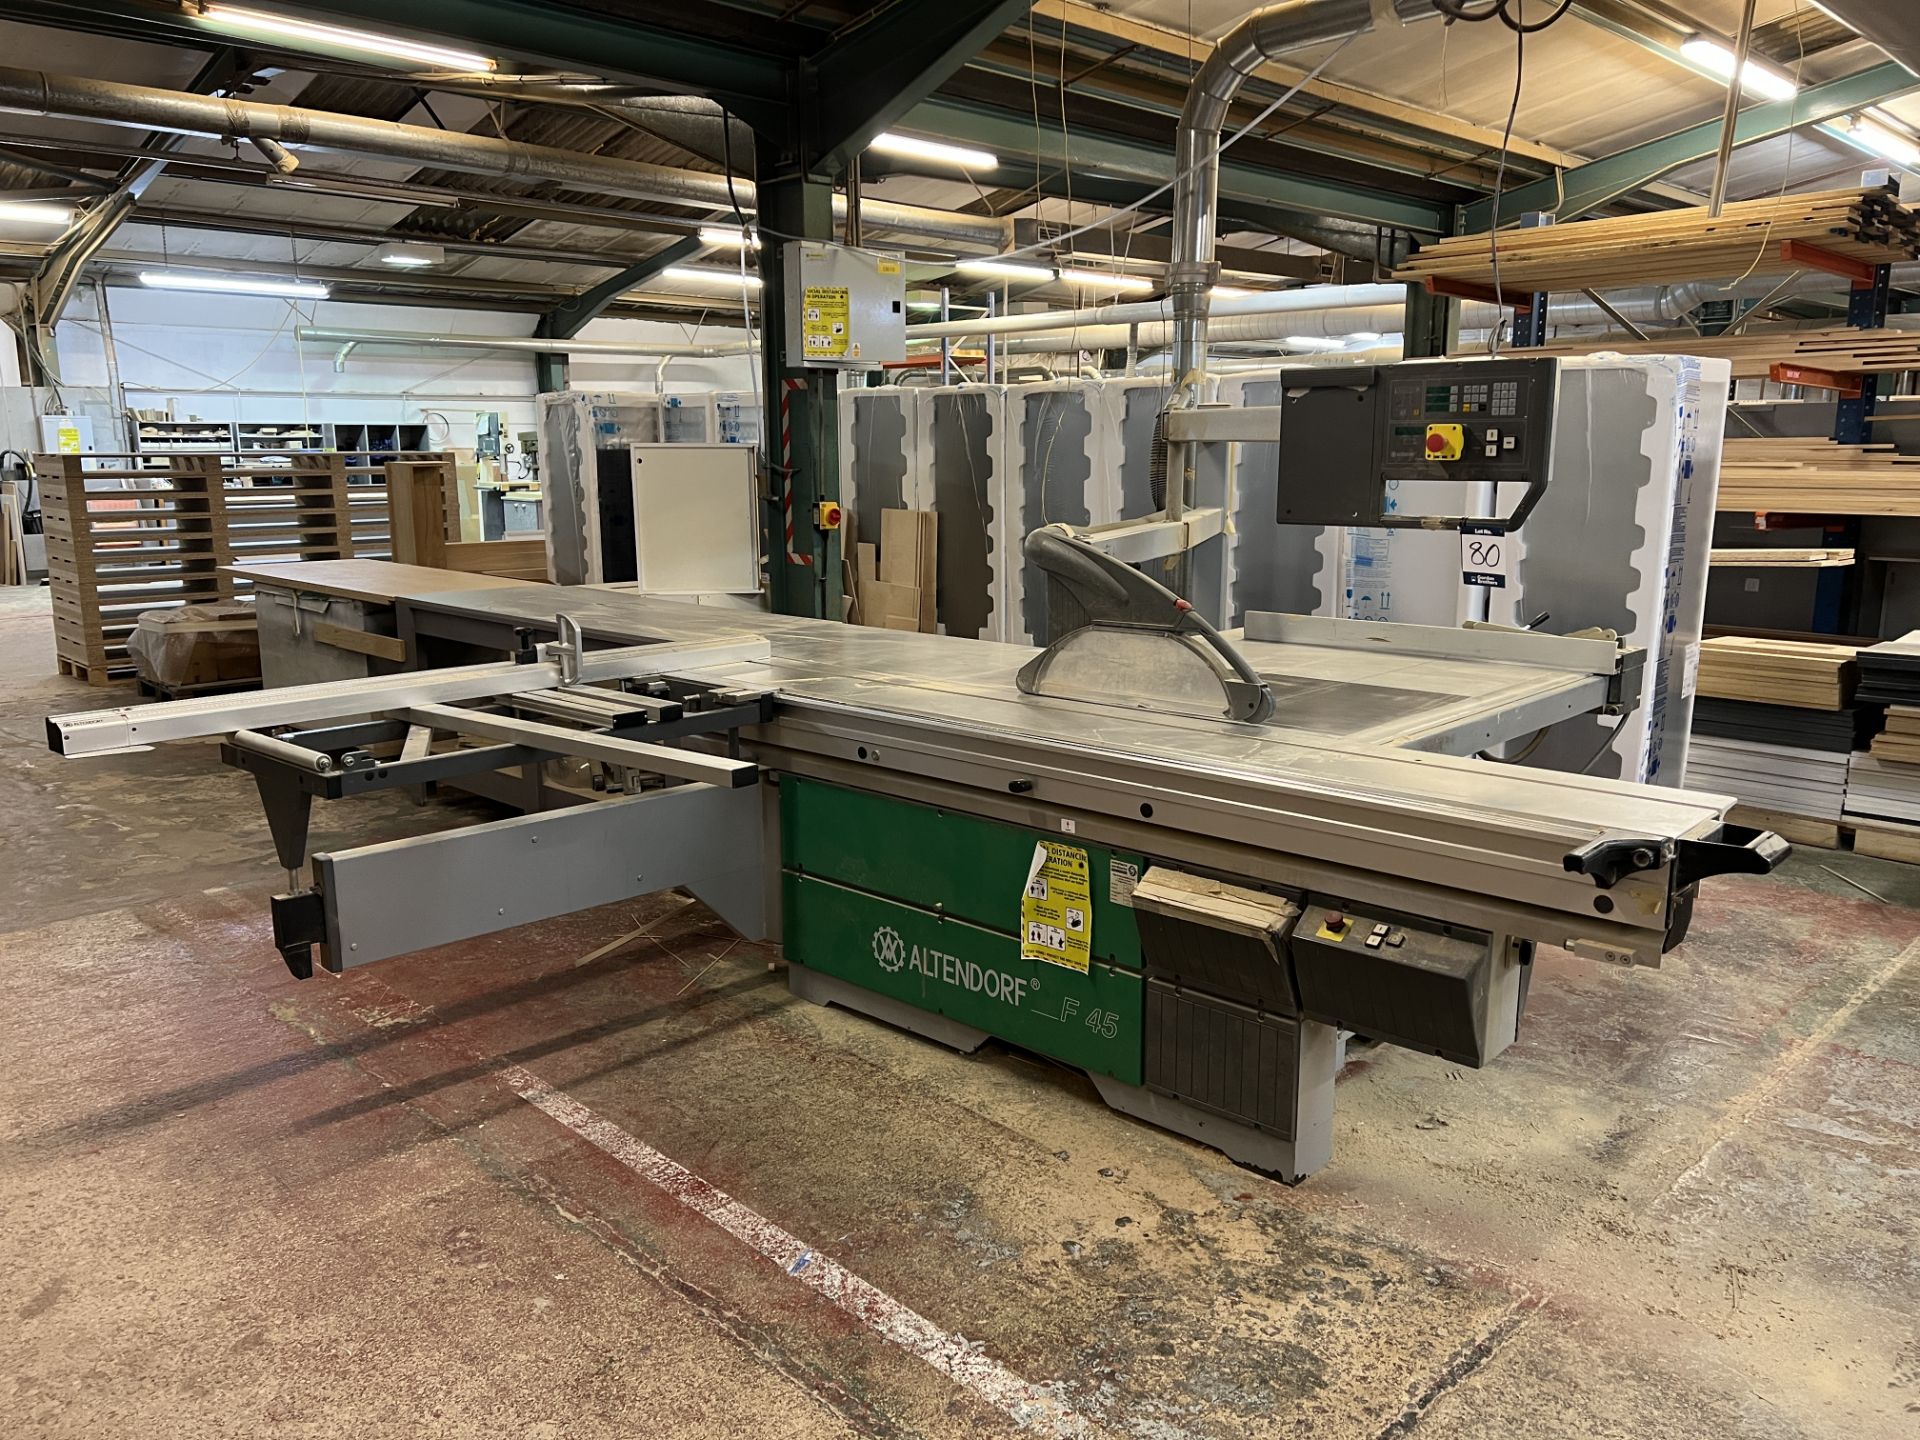 Altendorf Elmo F45 sliding table panel saw, table size 2m x 2.5m, sliding table length, trolley - Image 4 of 9